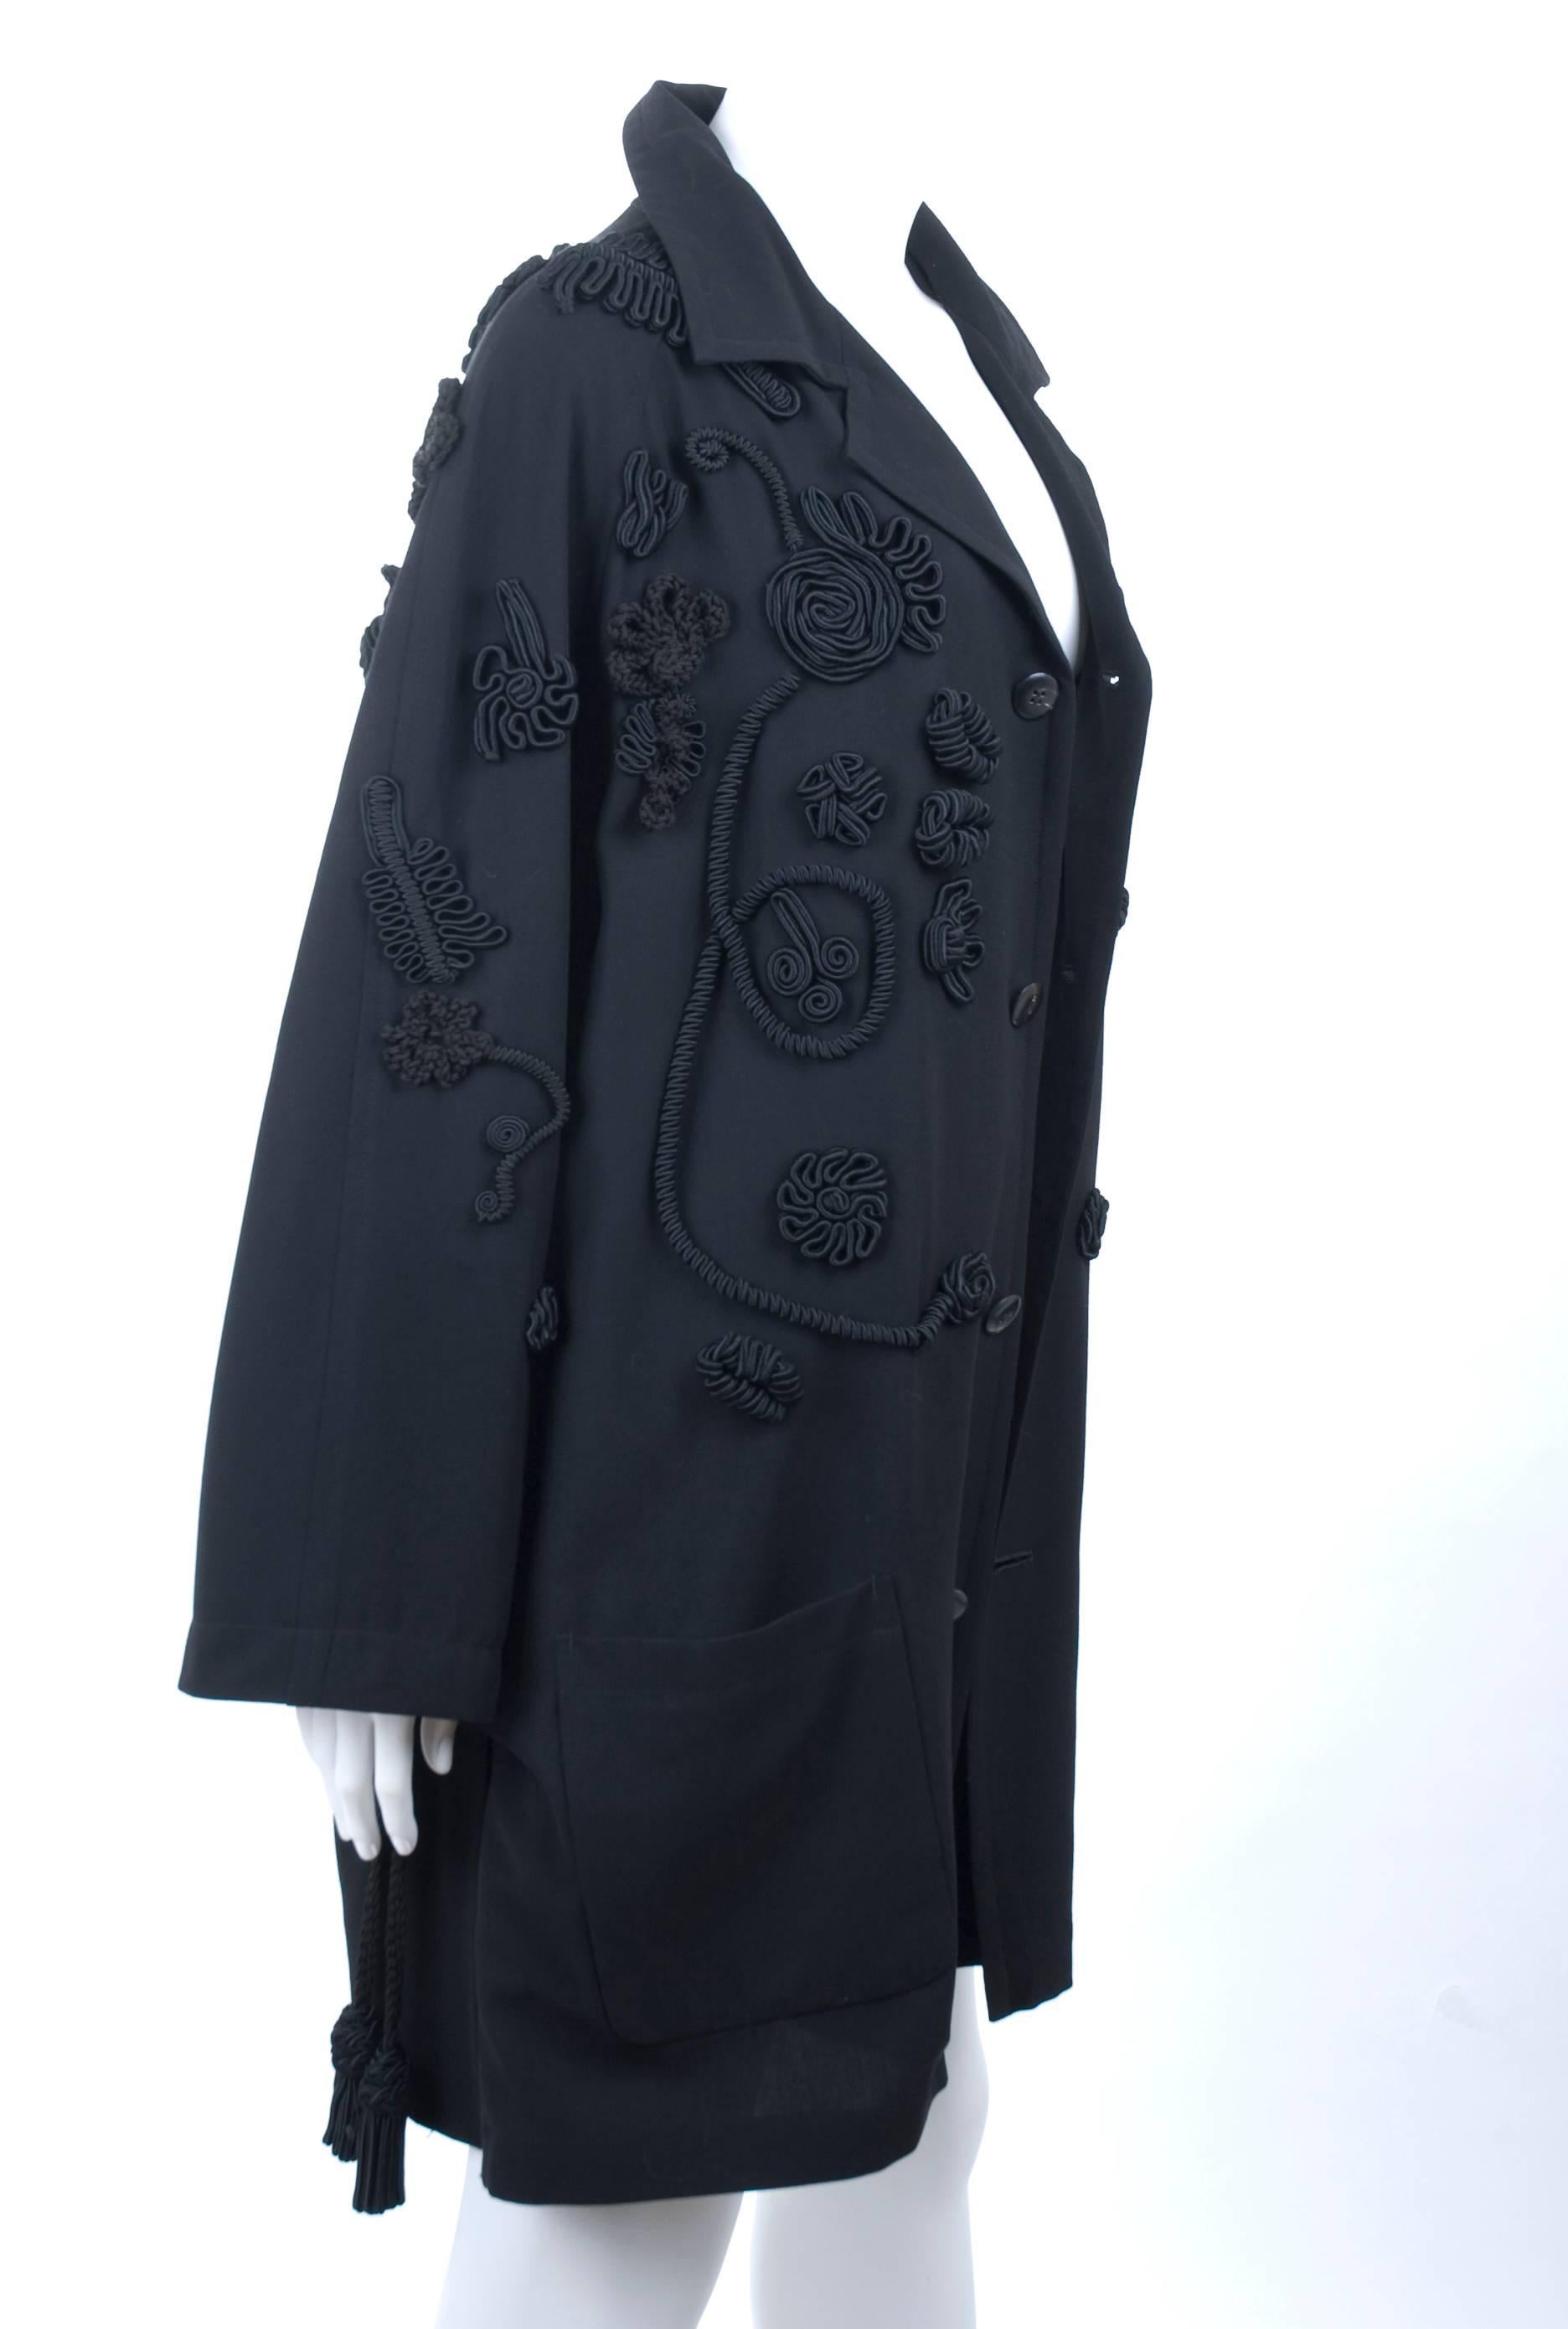 Women's 90's Yohji Yamamoto Black Coat with Corded Embroidery + Tassels Allover. For Sale